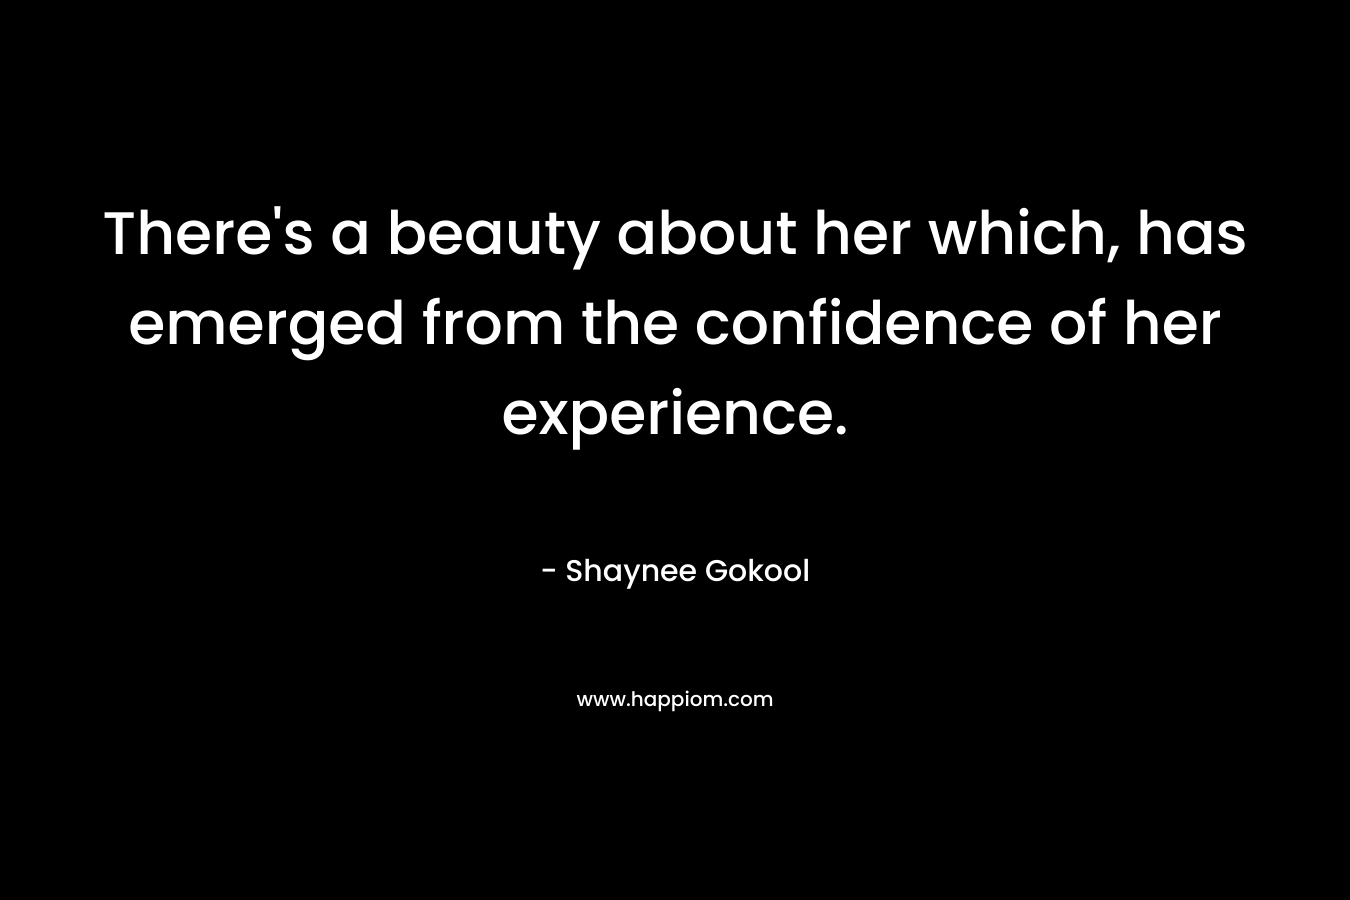 There’s a beauty about her which, has emerged from the confidence of her experience. – Shaynee Gokool